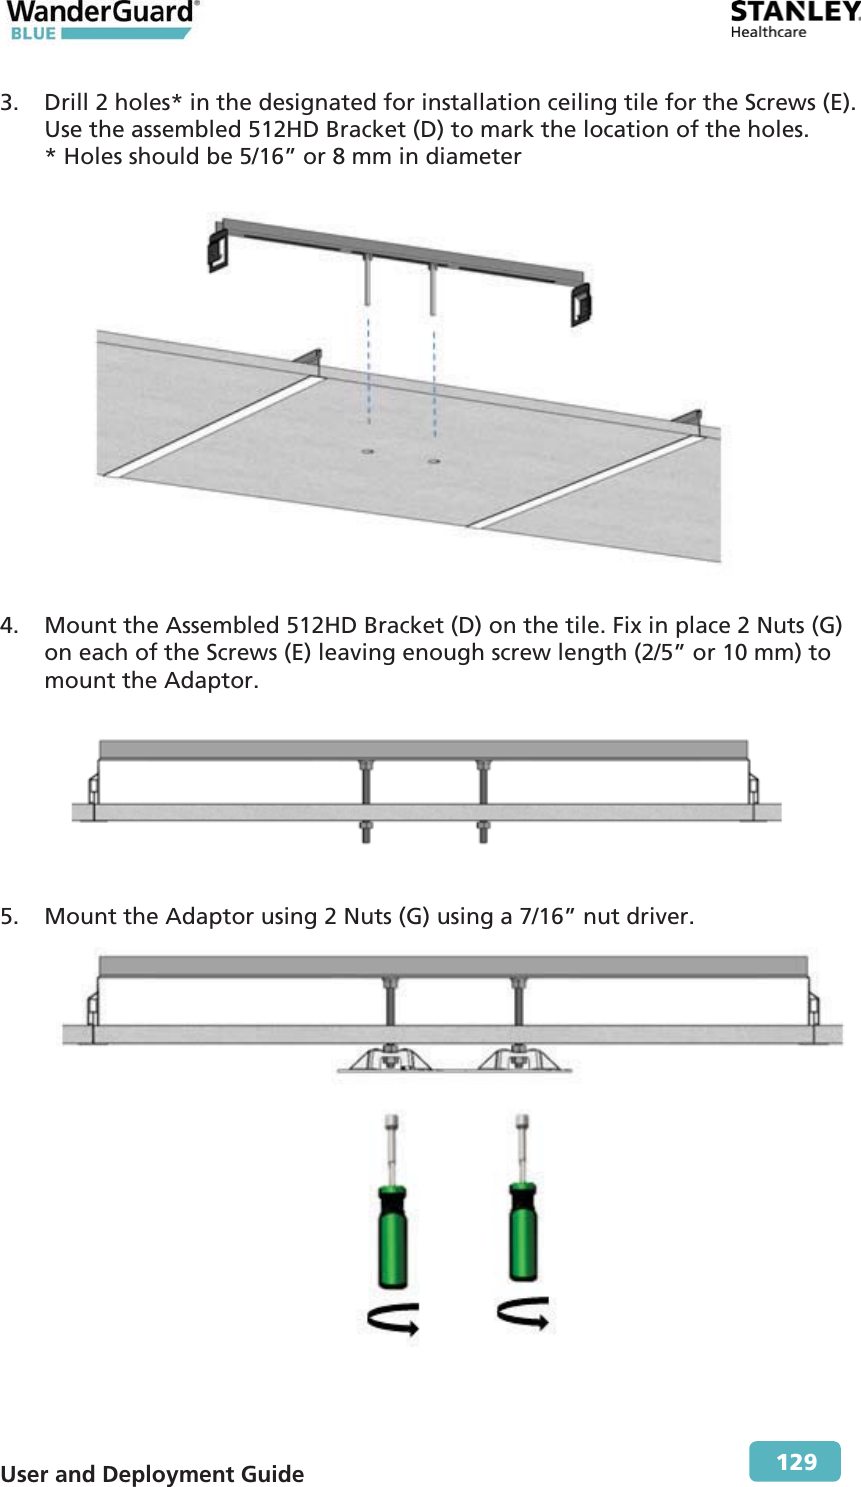  User and Deployment Guide        129 3. Drill 2 holes* in the designated for installation ceiling tile for the Screws (E). Use the assembled 512HD Bracket (D) to mark the location of the holes.  * Holes should be 5/16” or 8 mm in diameter  4. Mount the Assembled 512HD Bracket (D) on the tile. Fix in place 2 Nuts (G) on each of the Screws (E) leaving enough screw length (2/5” or 10 mm) to mount the Adaptor.  5. Mount the Adaptor using 2 Nuts (G) using a 7/16” nut driver.  